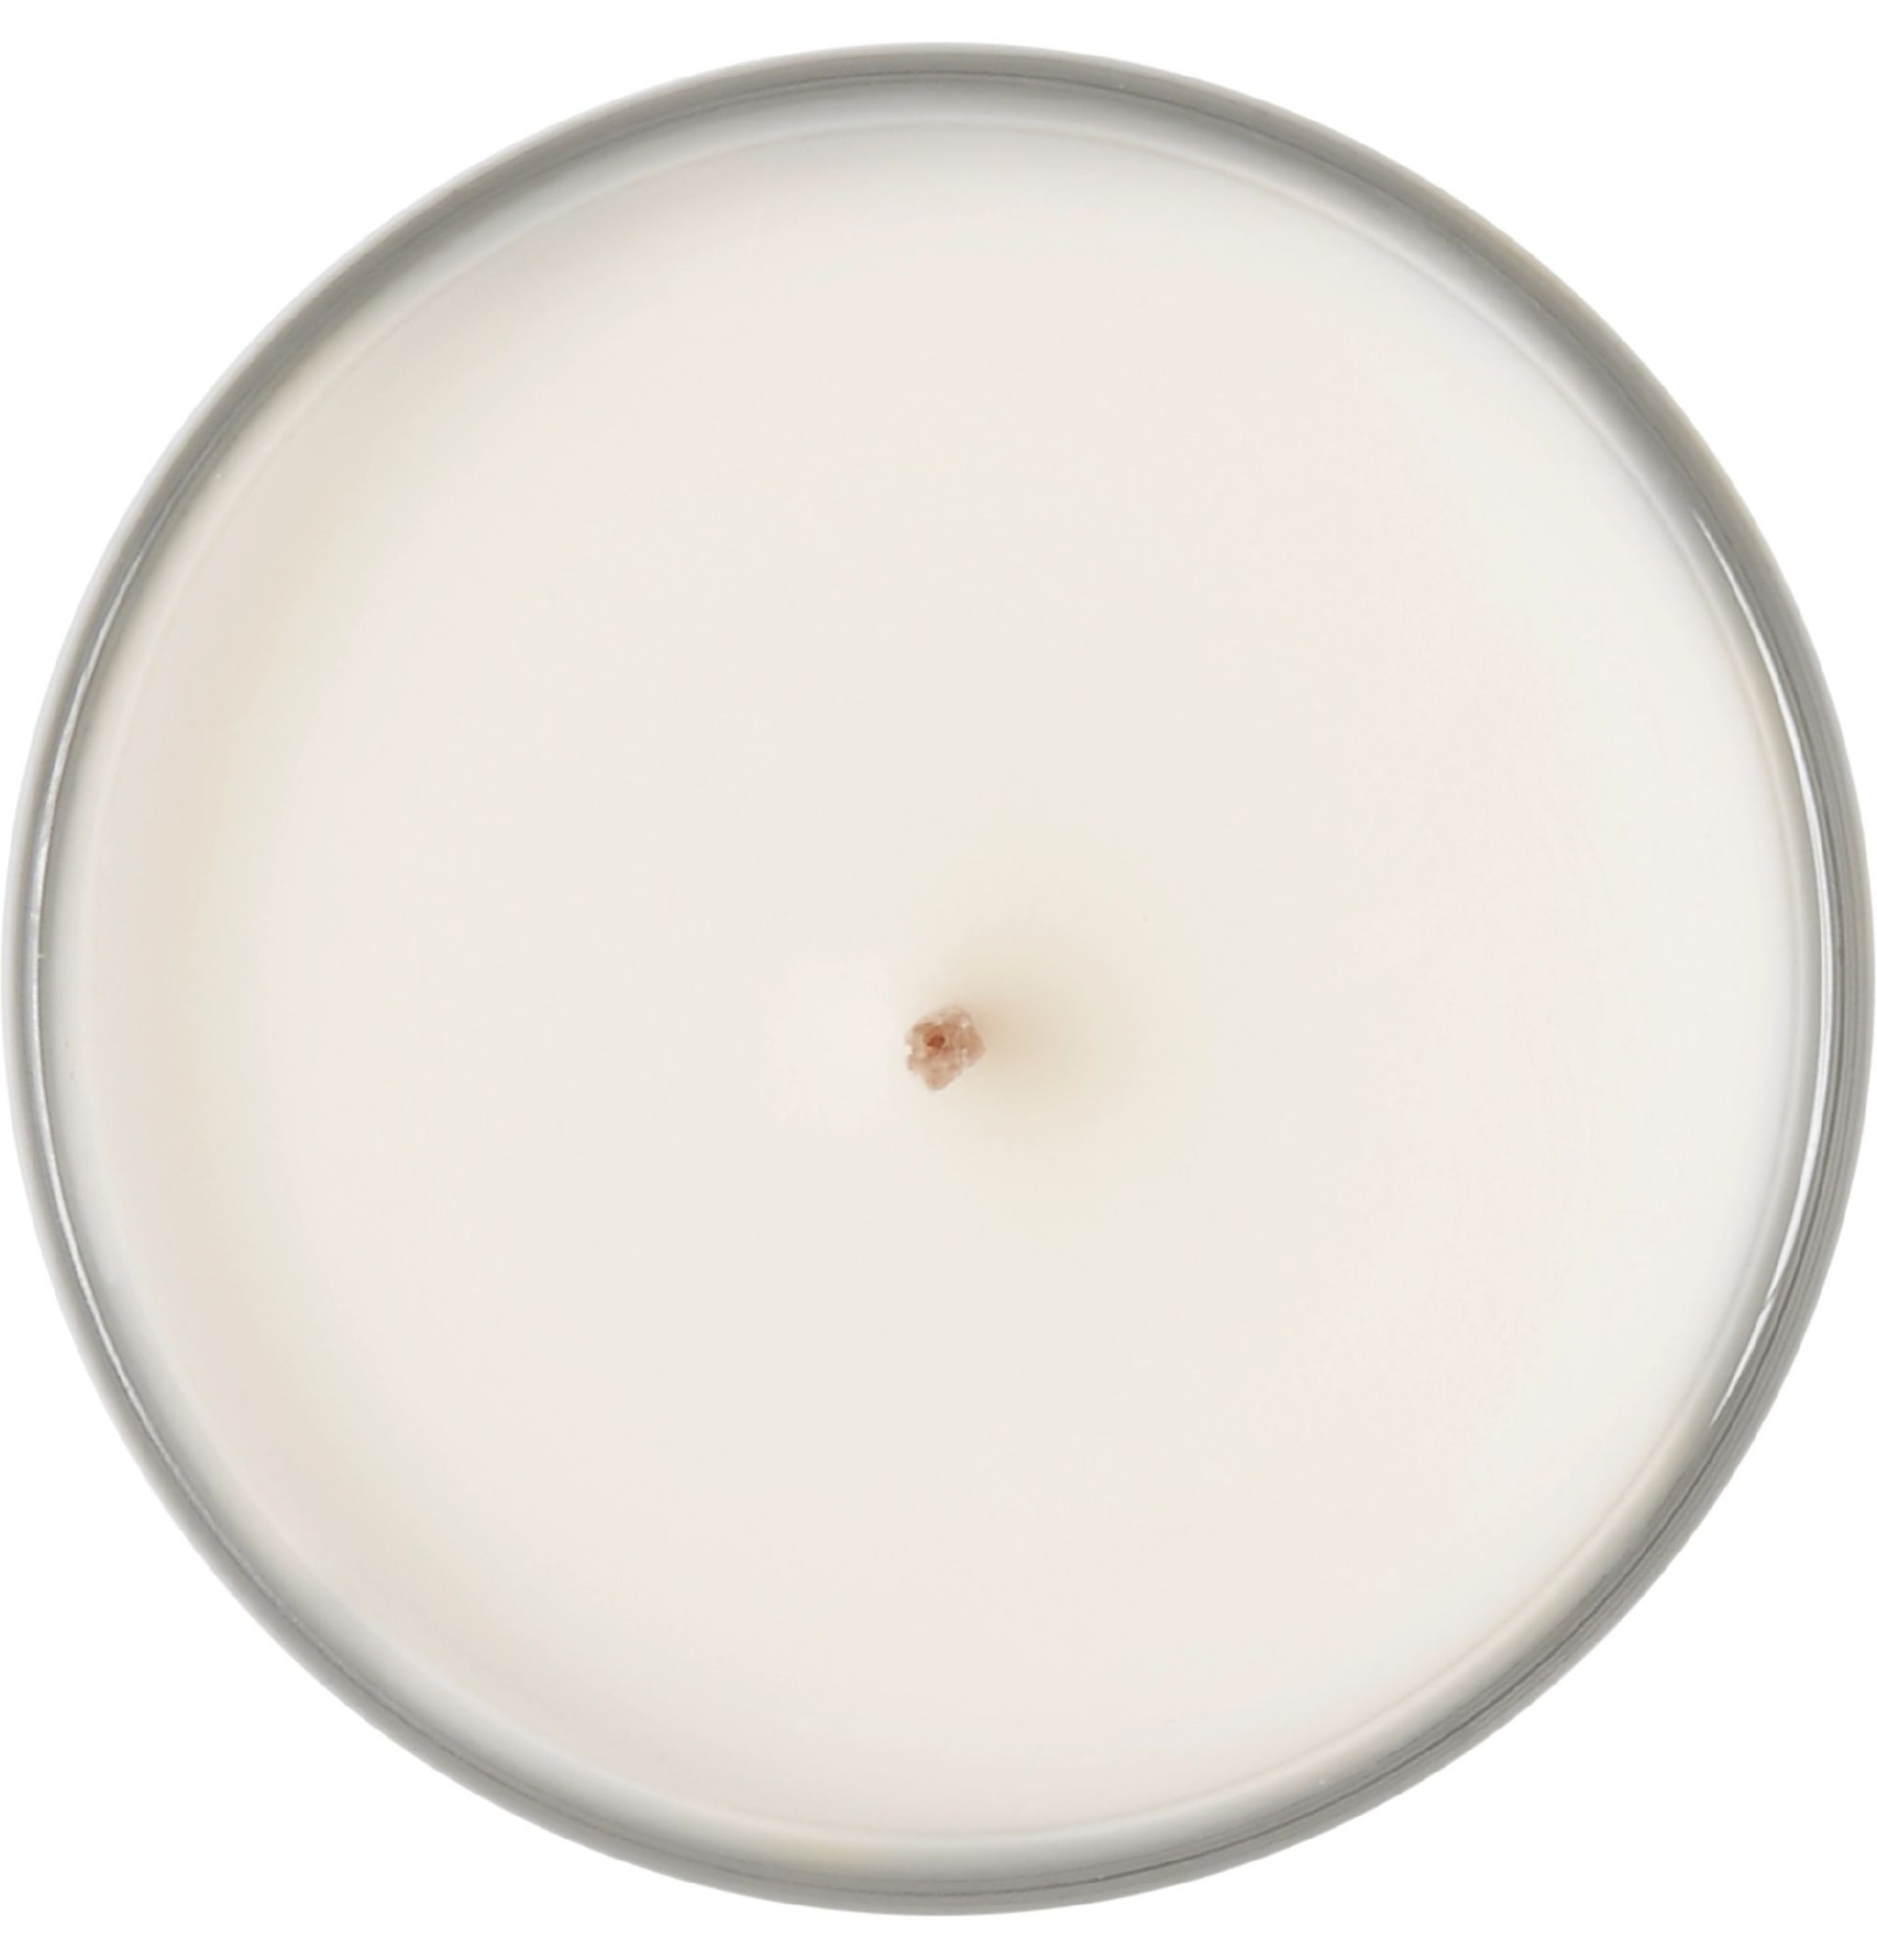 ambre-scented-candle-70g-2499567818659159